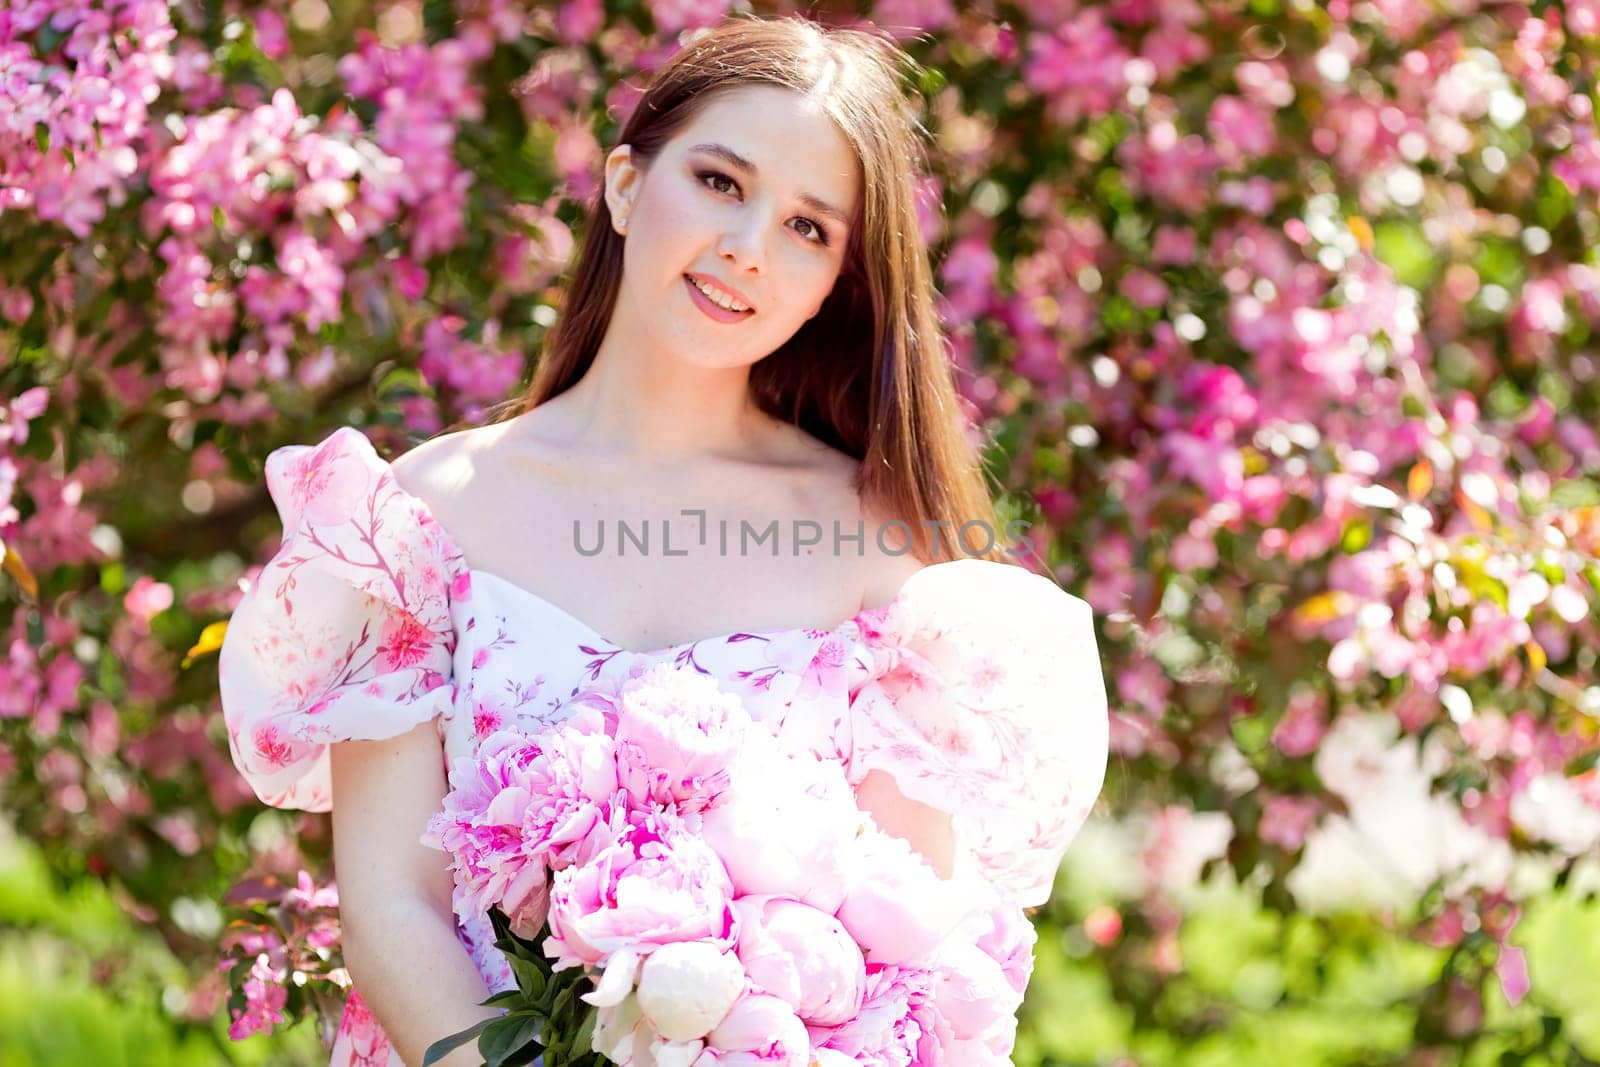 A portrait of a beautiful girl holding a large bouquet of pink peonies in her hands stands in a blooming garden on a sunny day. Look at camera, smiling. Copy space